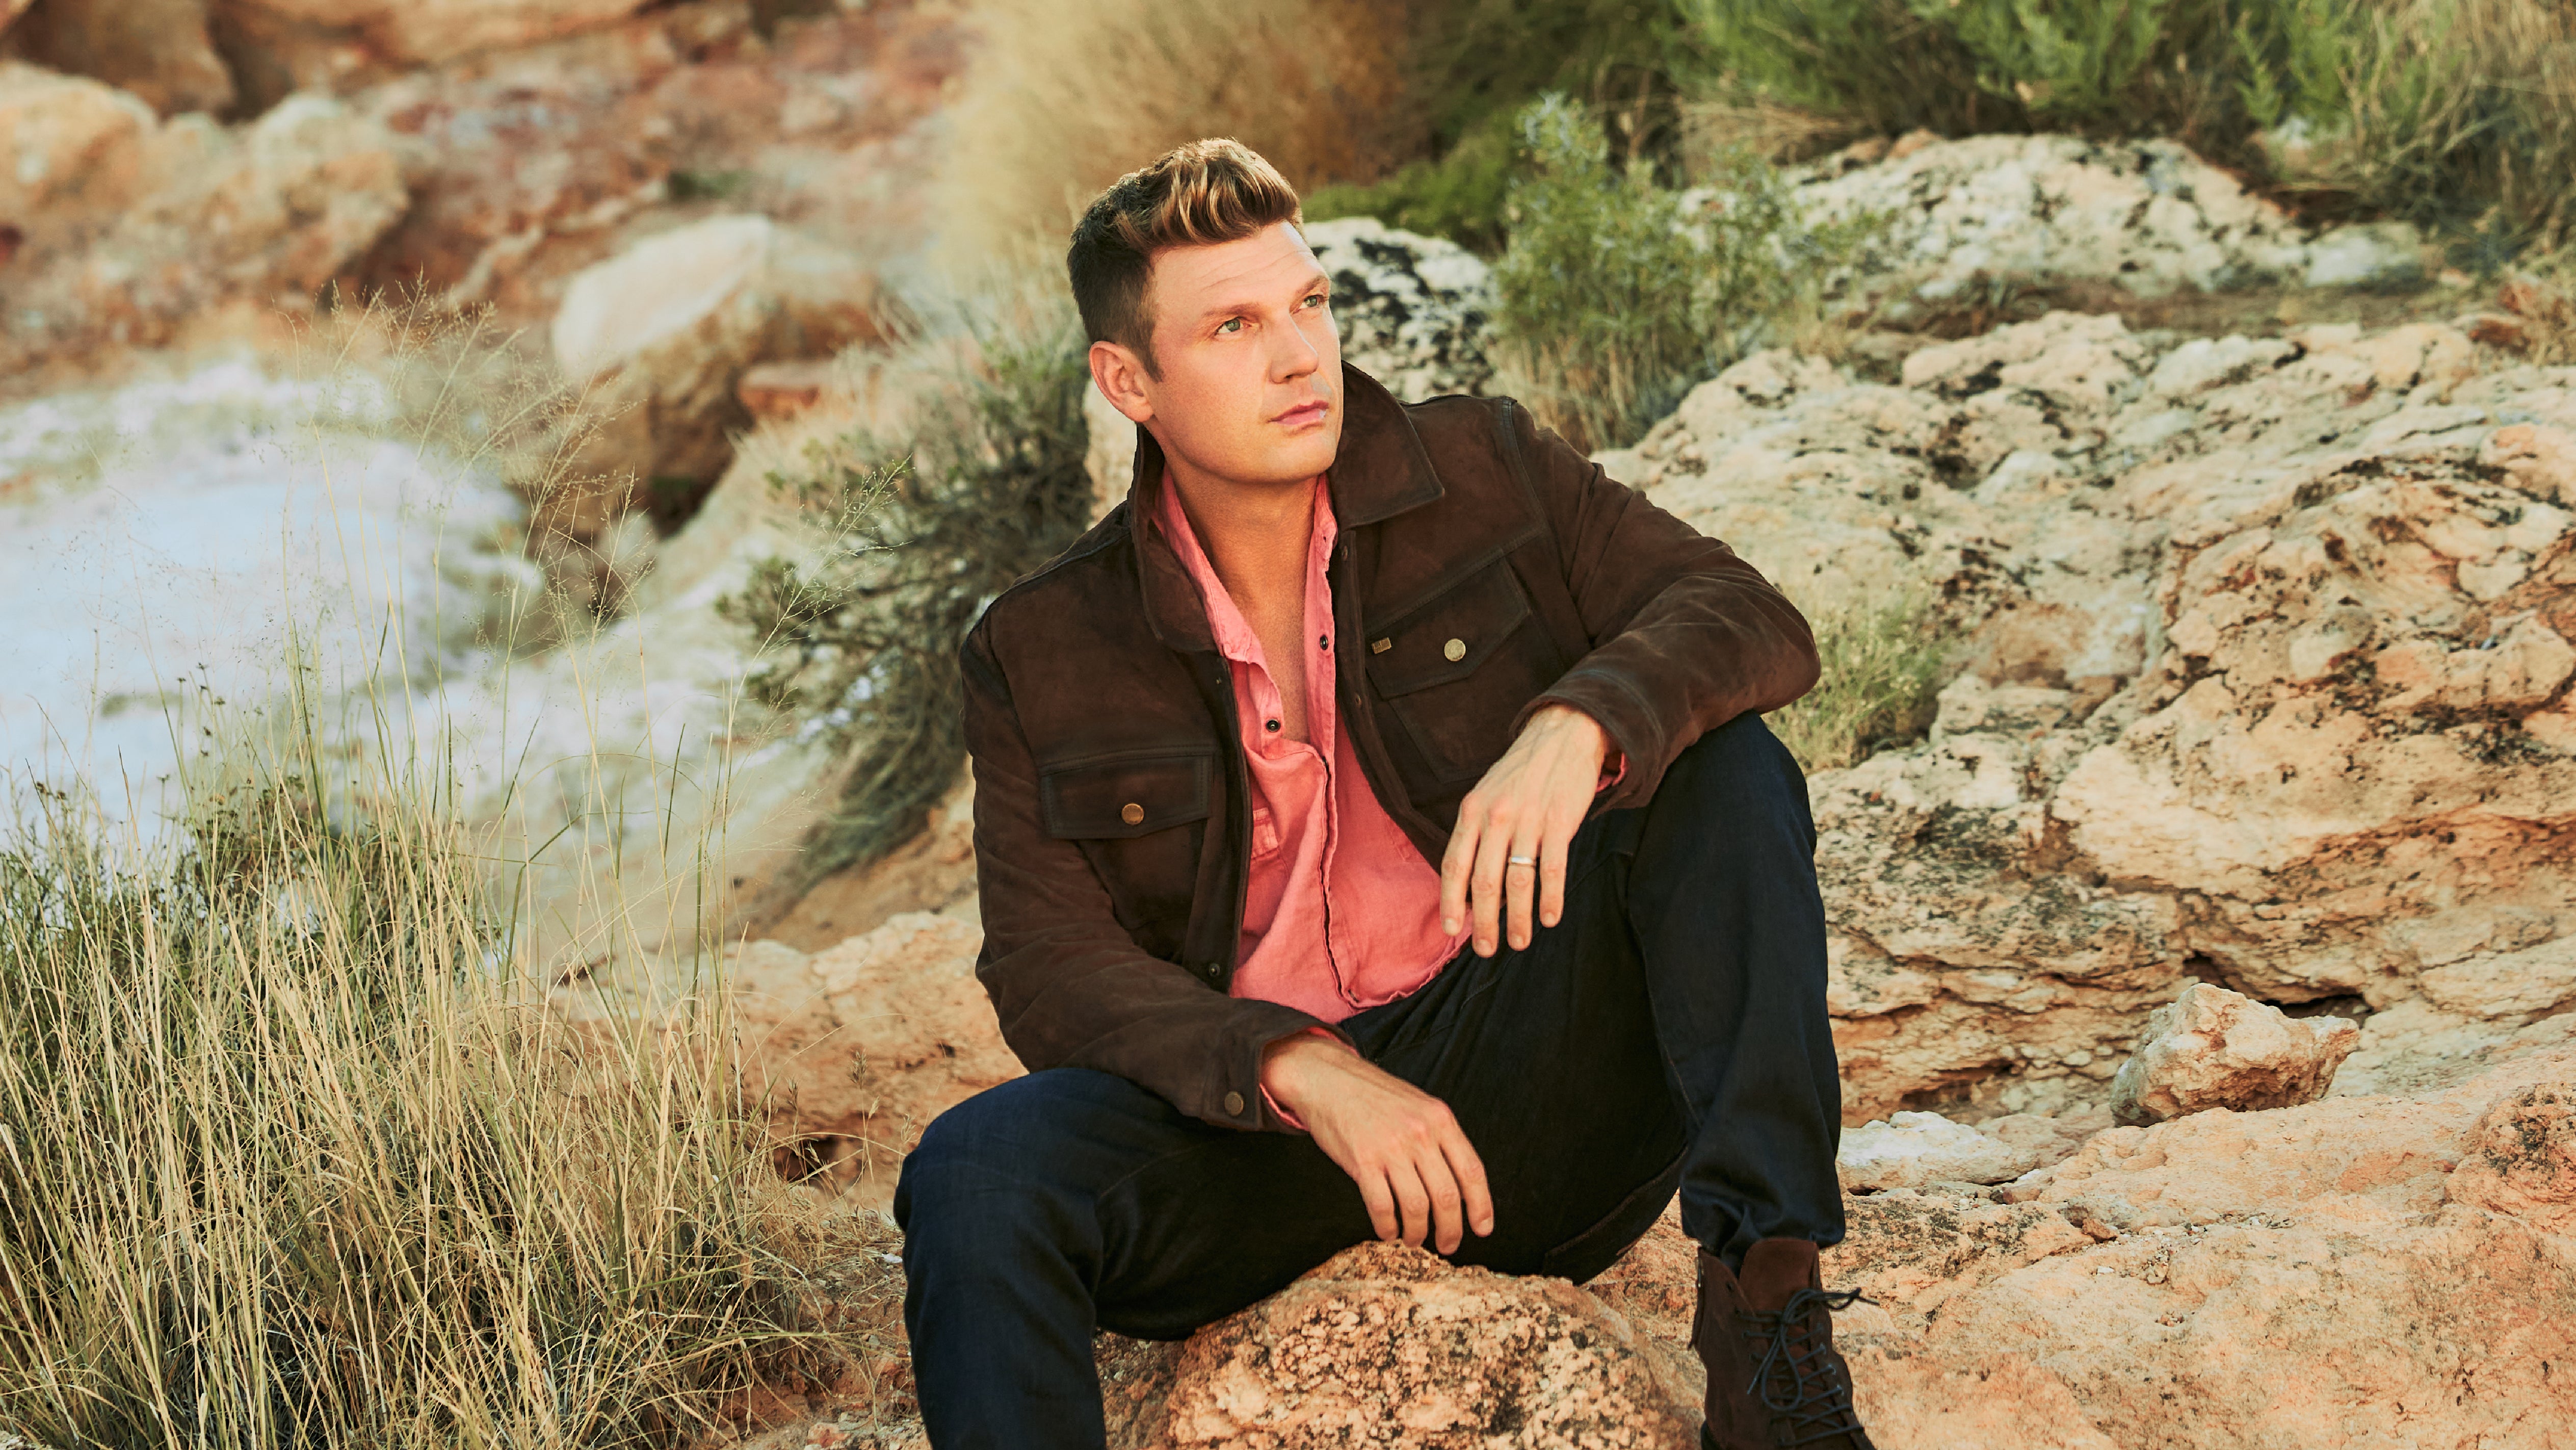 Nick Carter: Who I Am 2023 Tour free presale code for concert tickets in Boston, MA (The Wilbur)